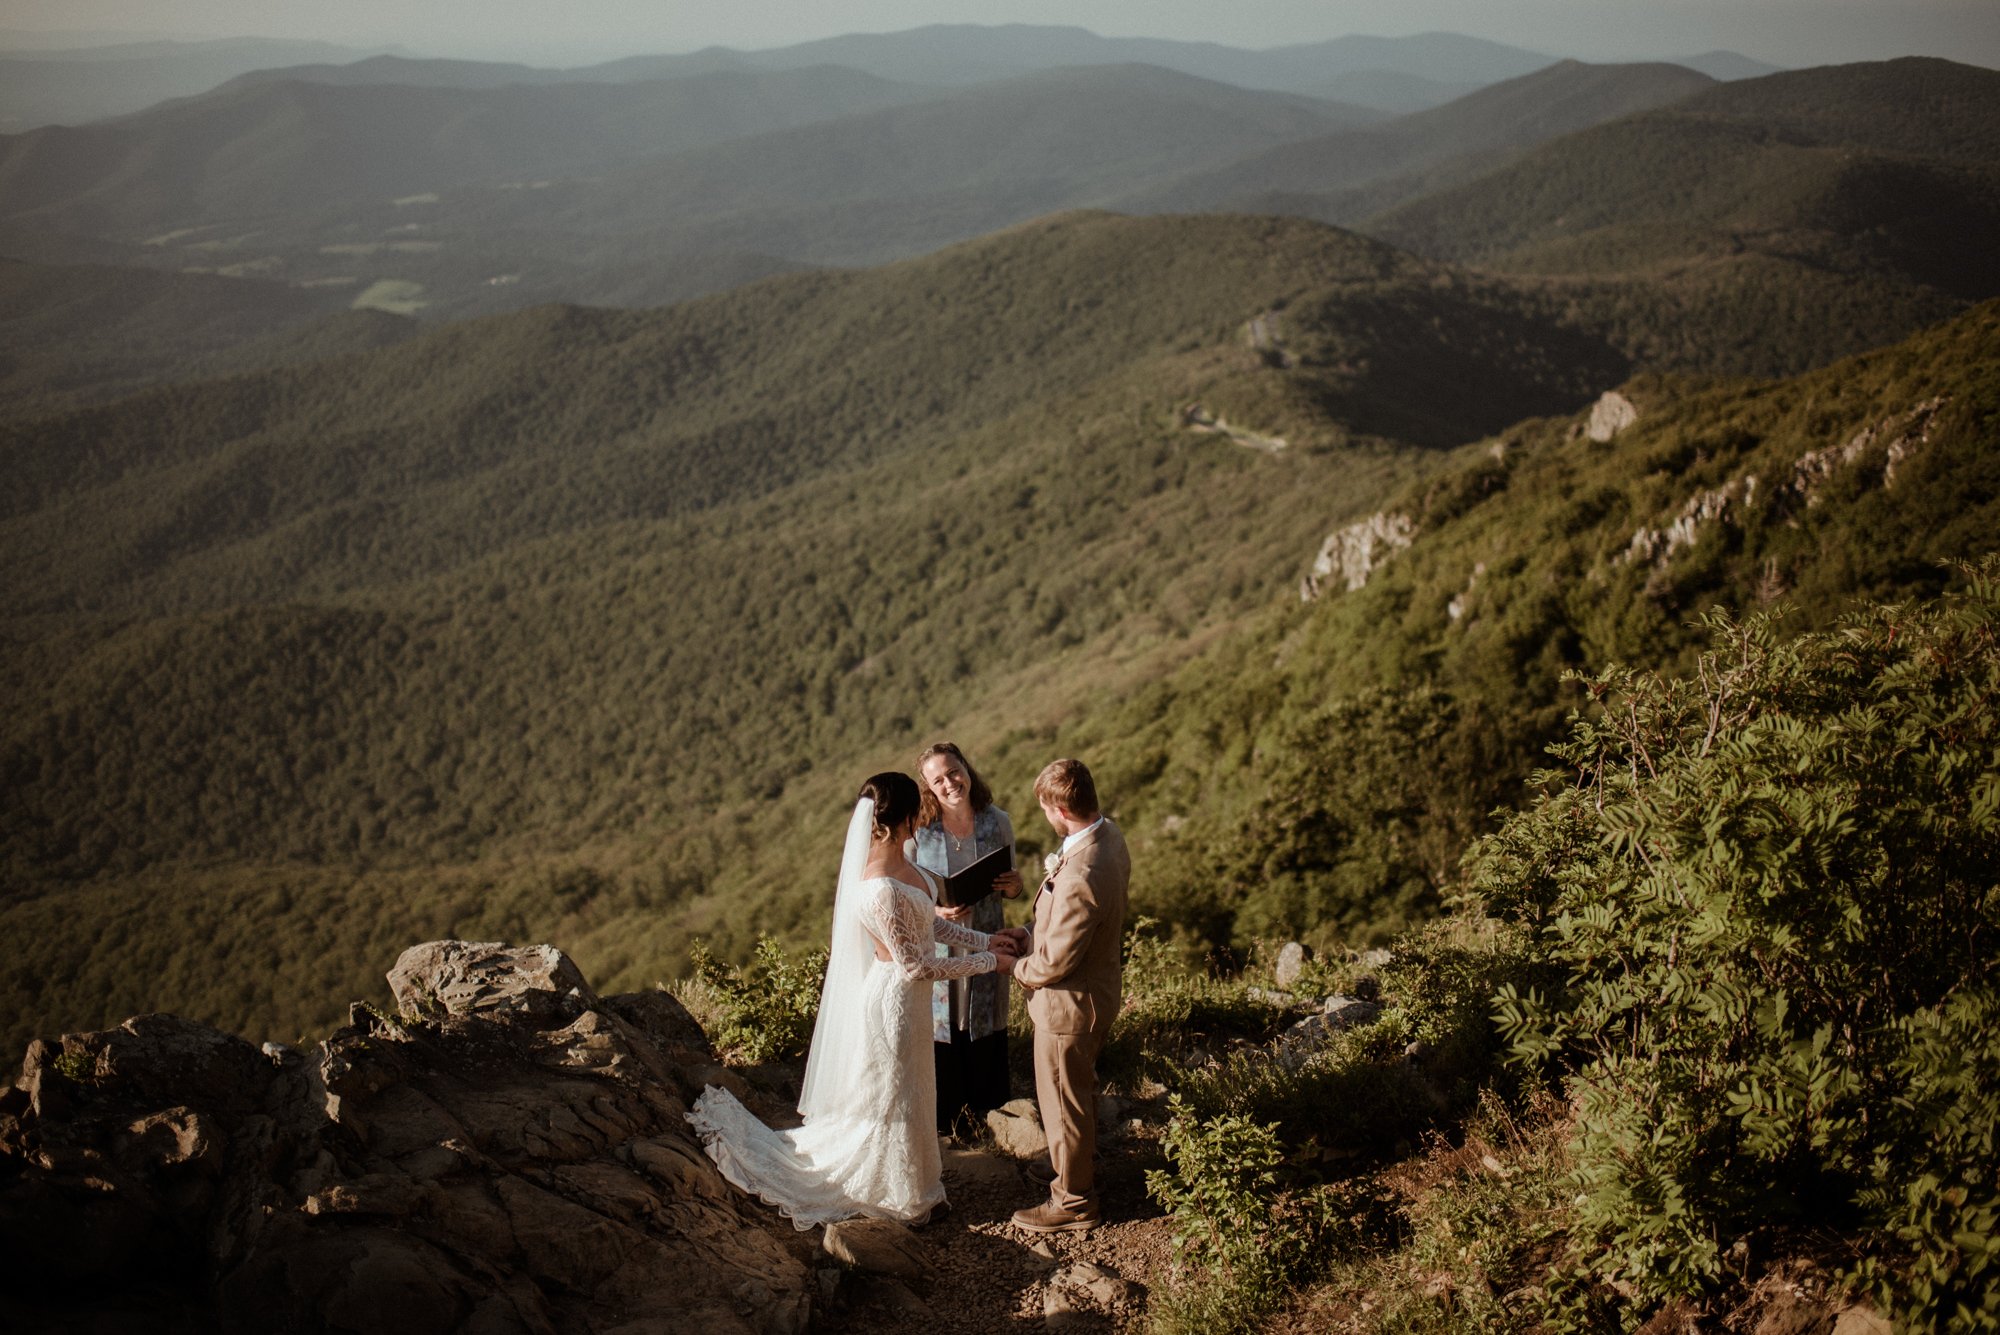 Sunset Elopement on Stony Man Summit in Shenandoah National Park - White Sails Creative Elopement Photography - July Elopement on the Blue Ridge Parkway_23.jpg